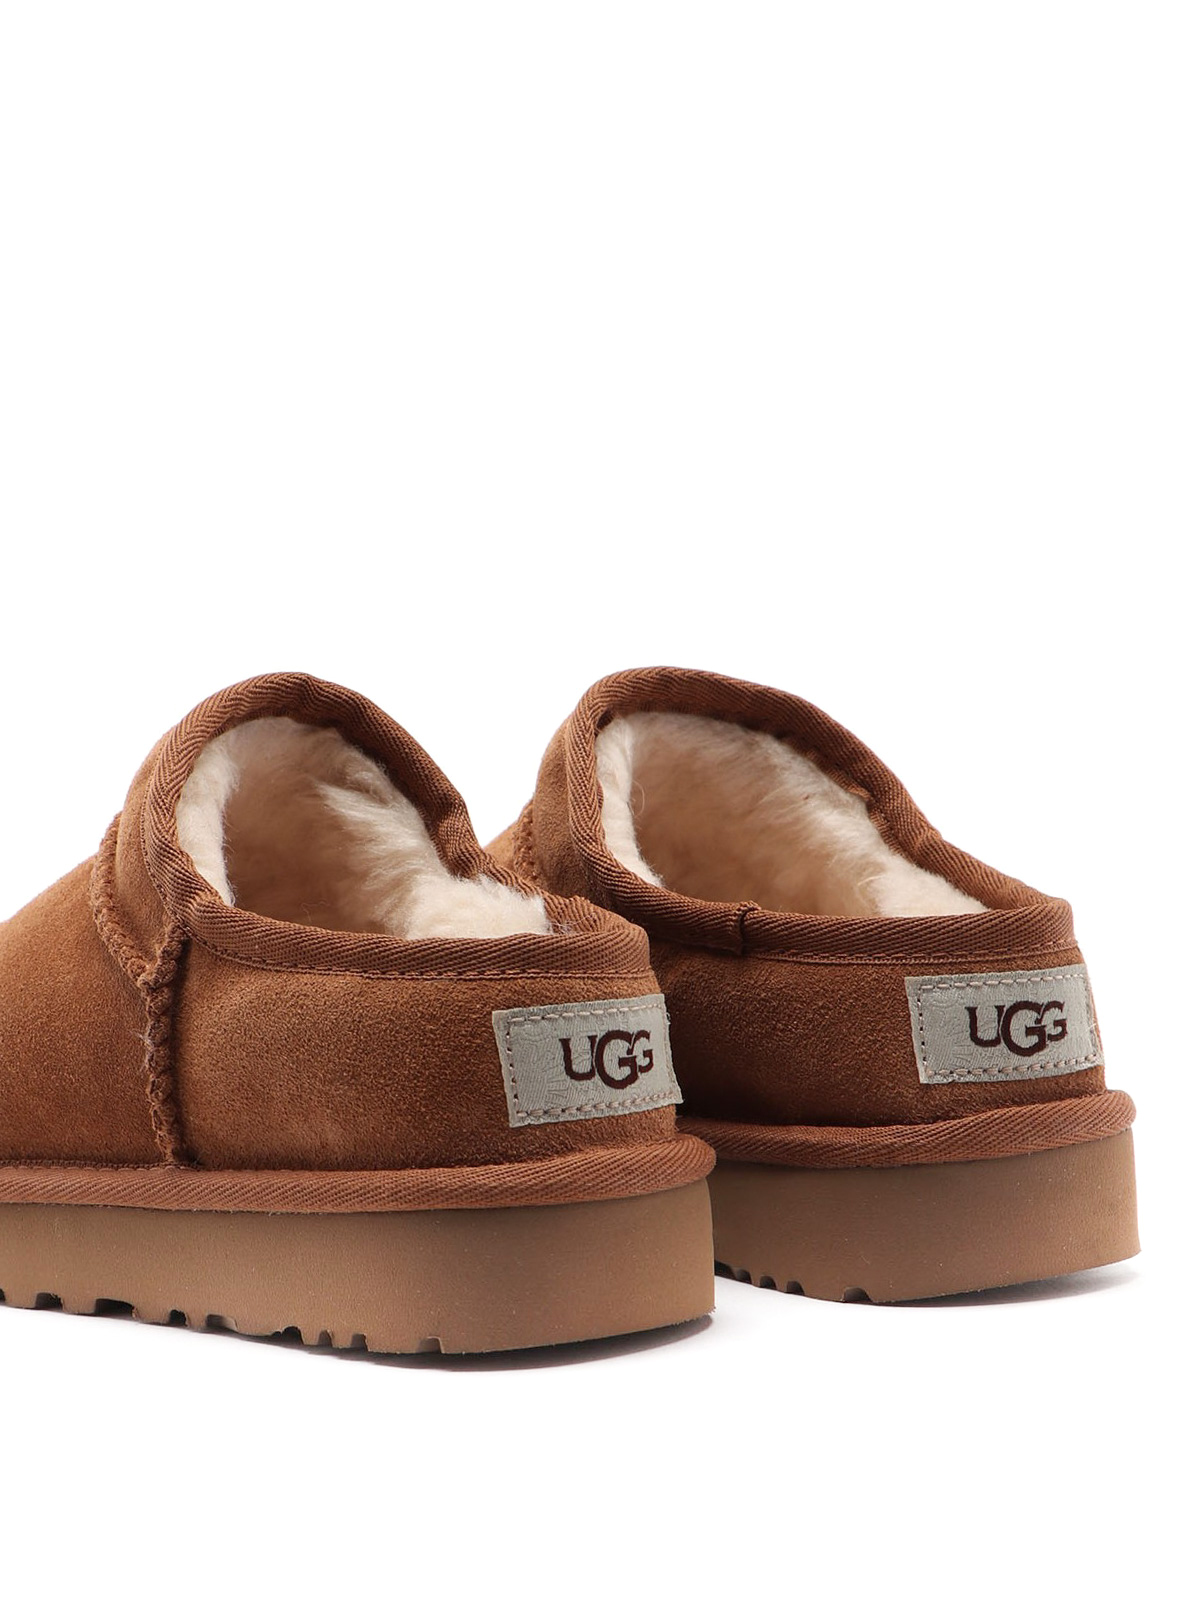 ugg suede loafers